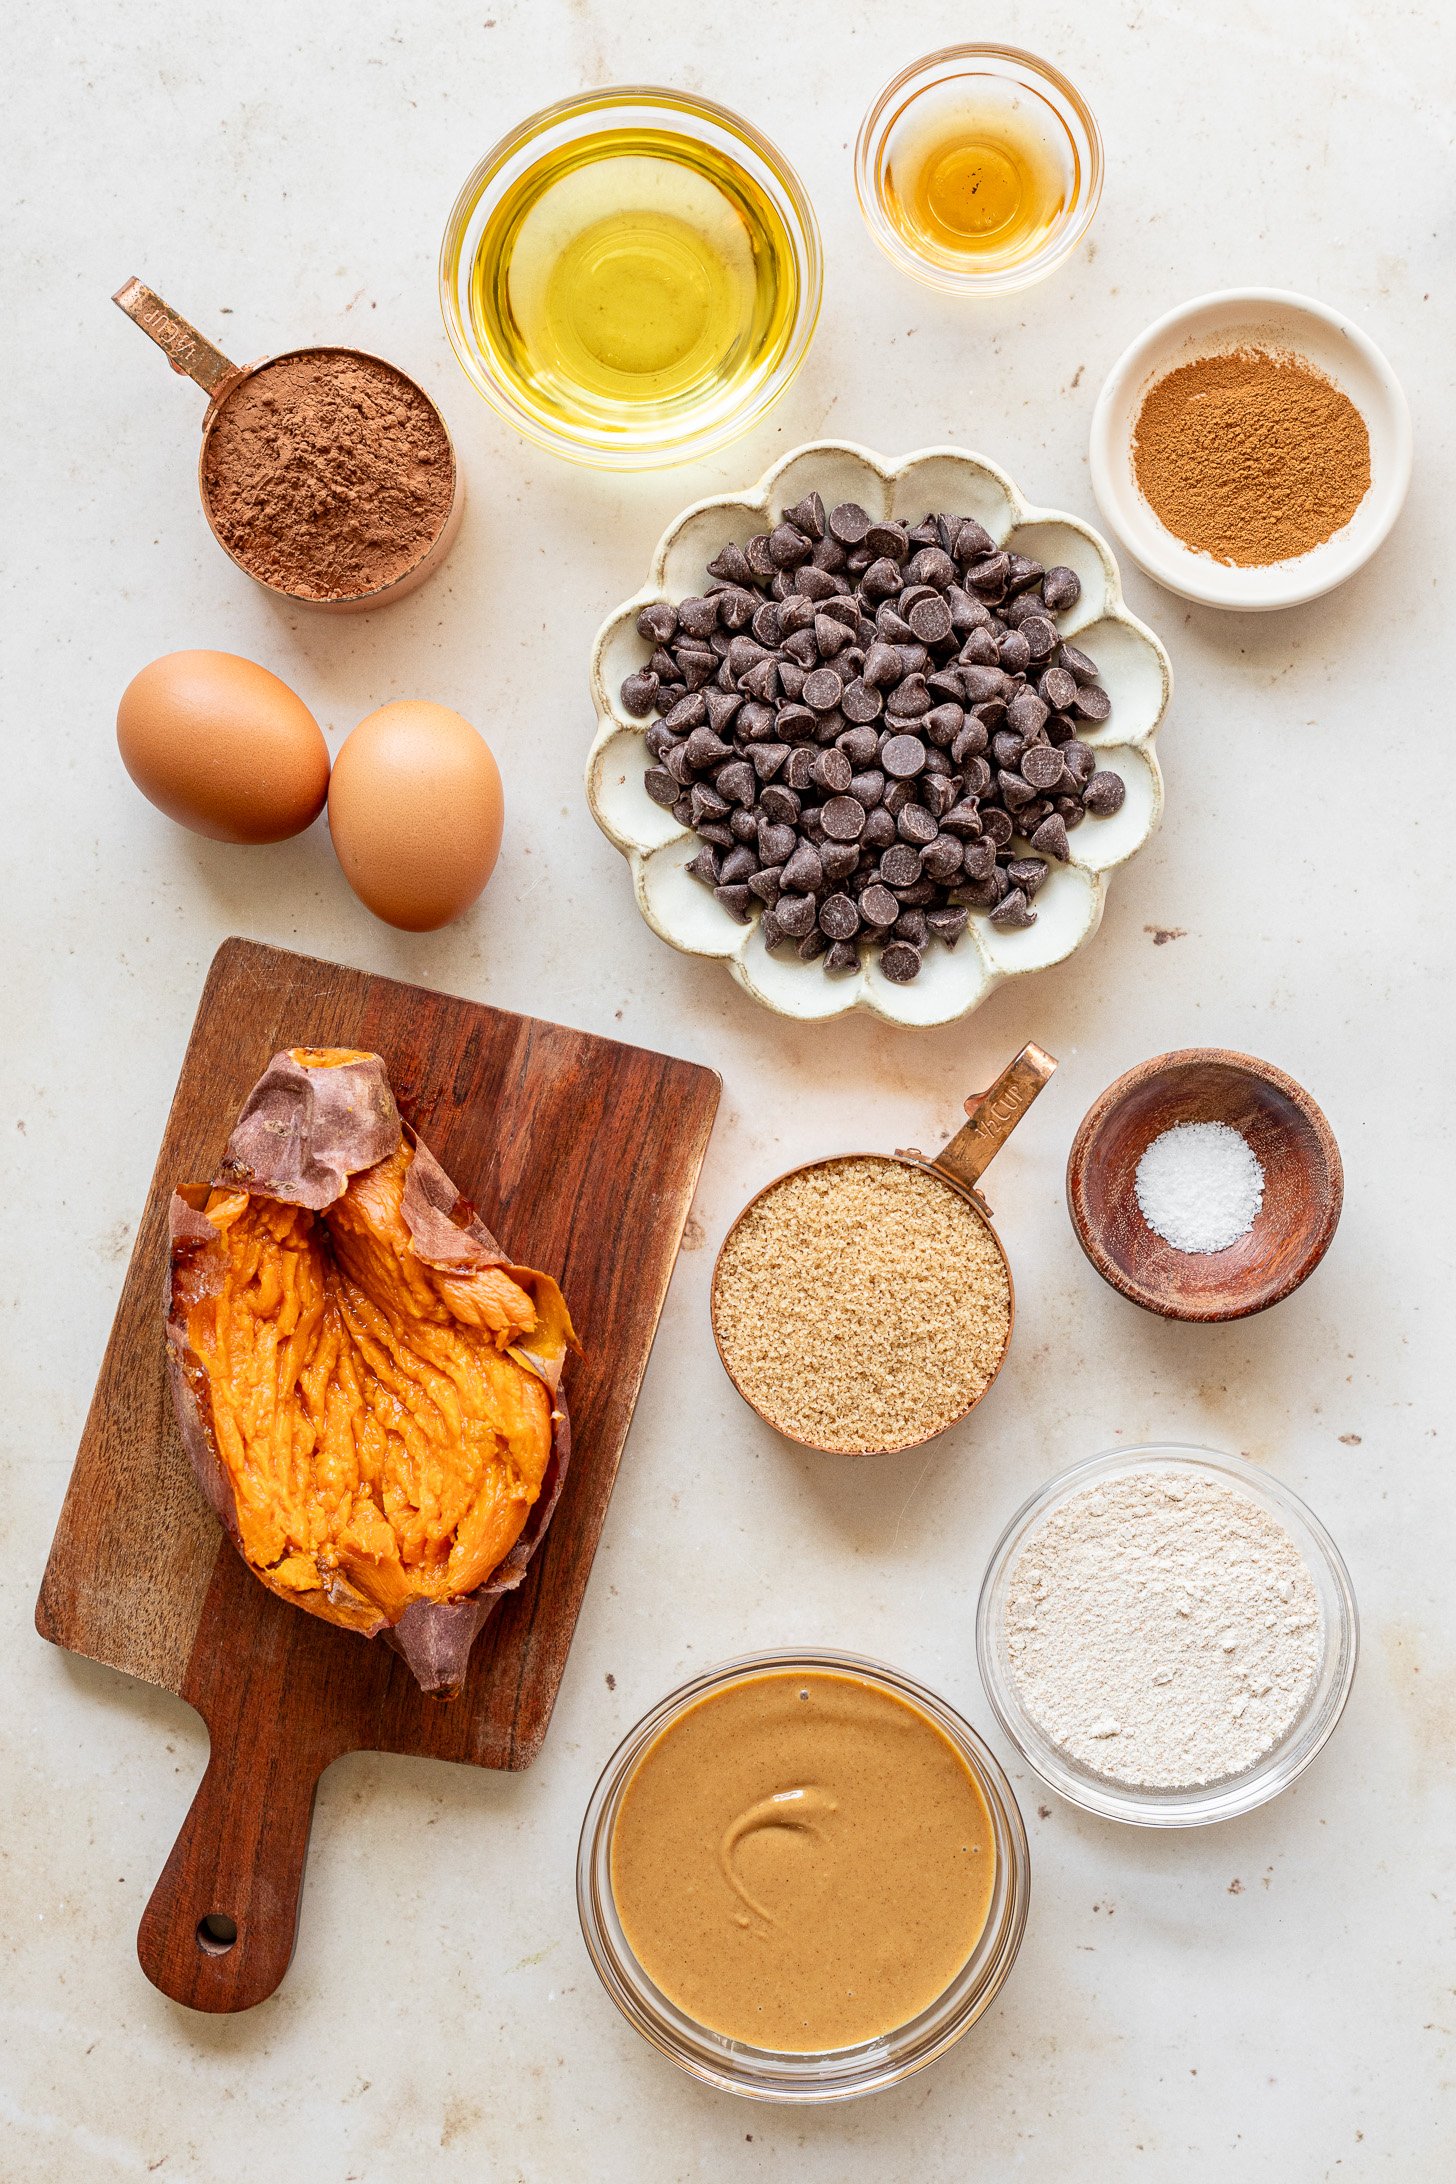 Ingredients for fudgy sweet potato brownies in bowls on a table before bing made into a batter.